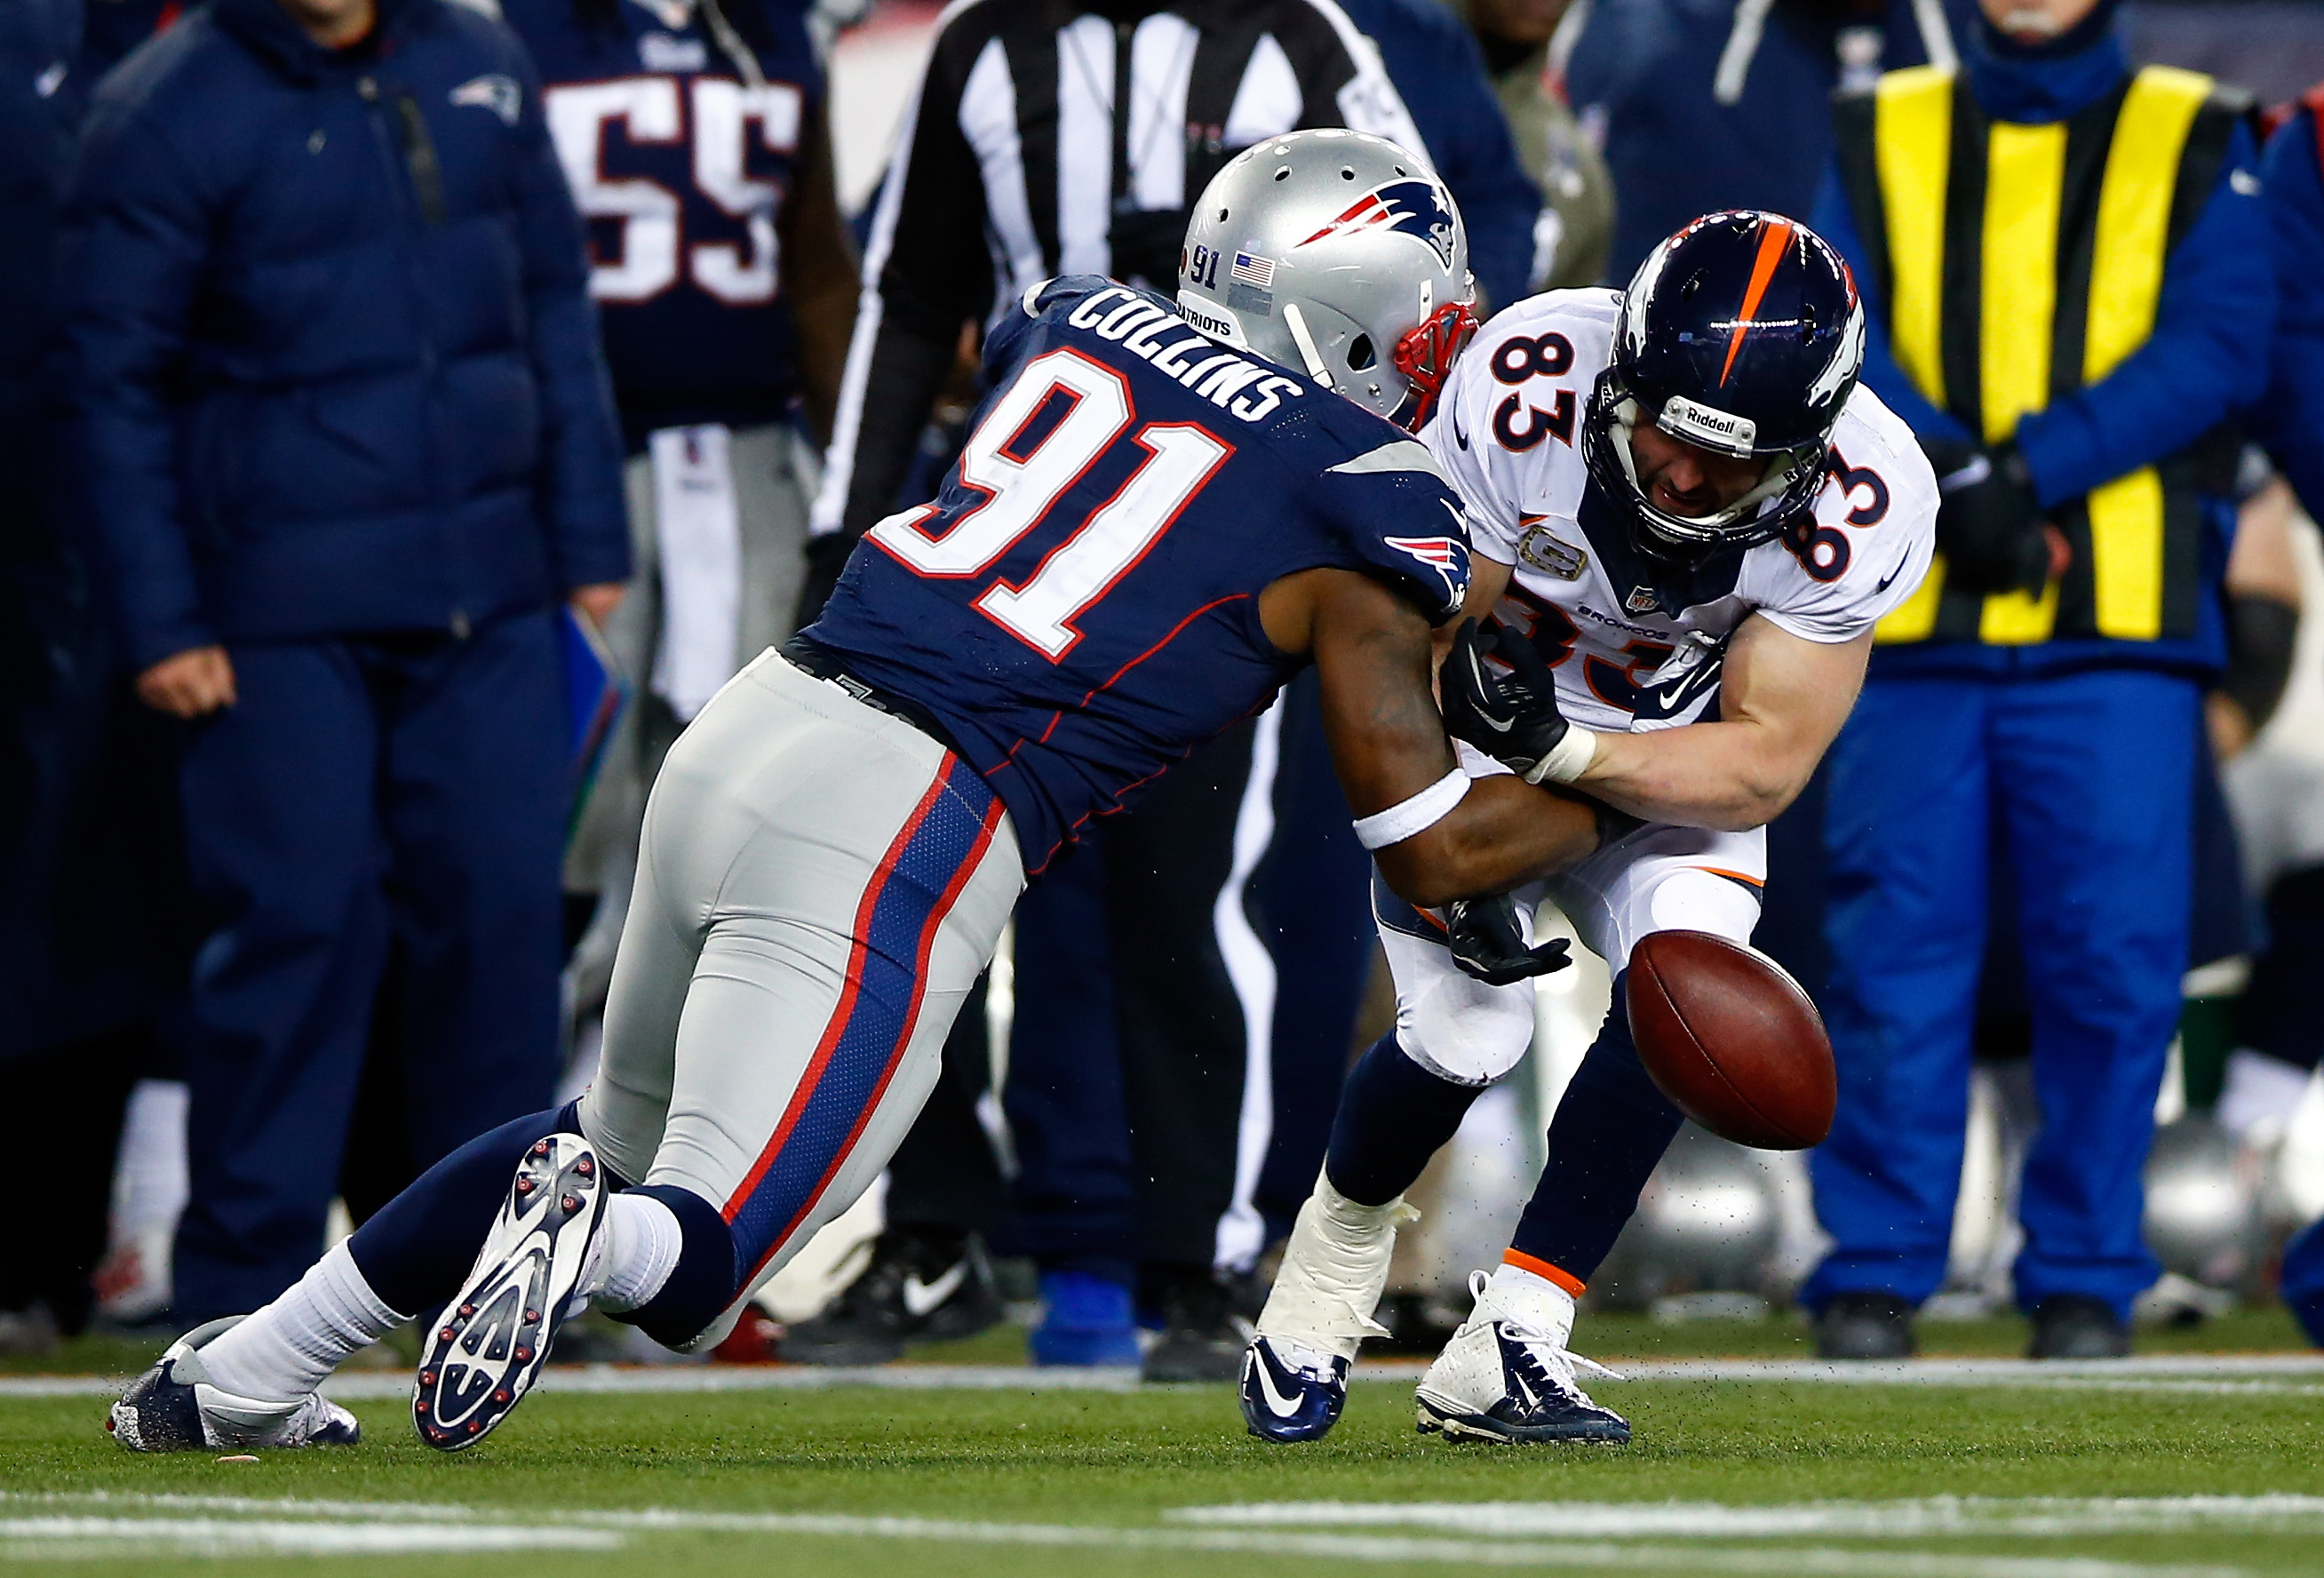 Broncos wide receiver Wes Welker cannot hold onto the ball as Patriots linebacker Jamie Collins defends.  (Photo by Jared Wickerham/Getty Images)